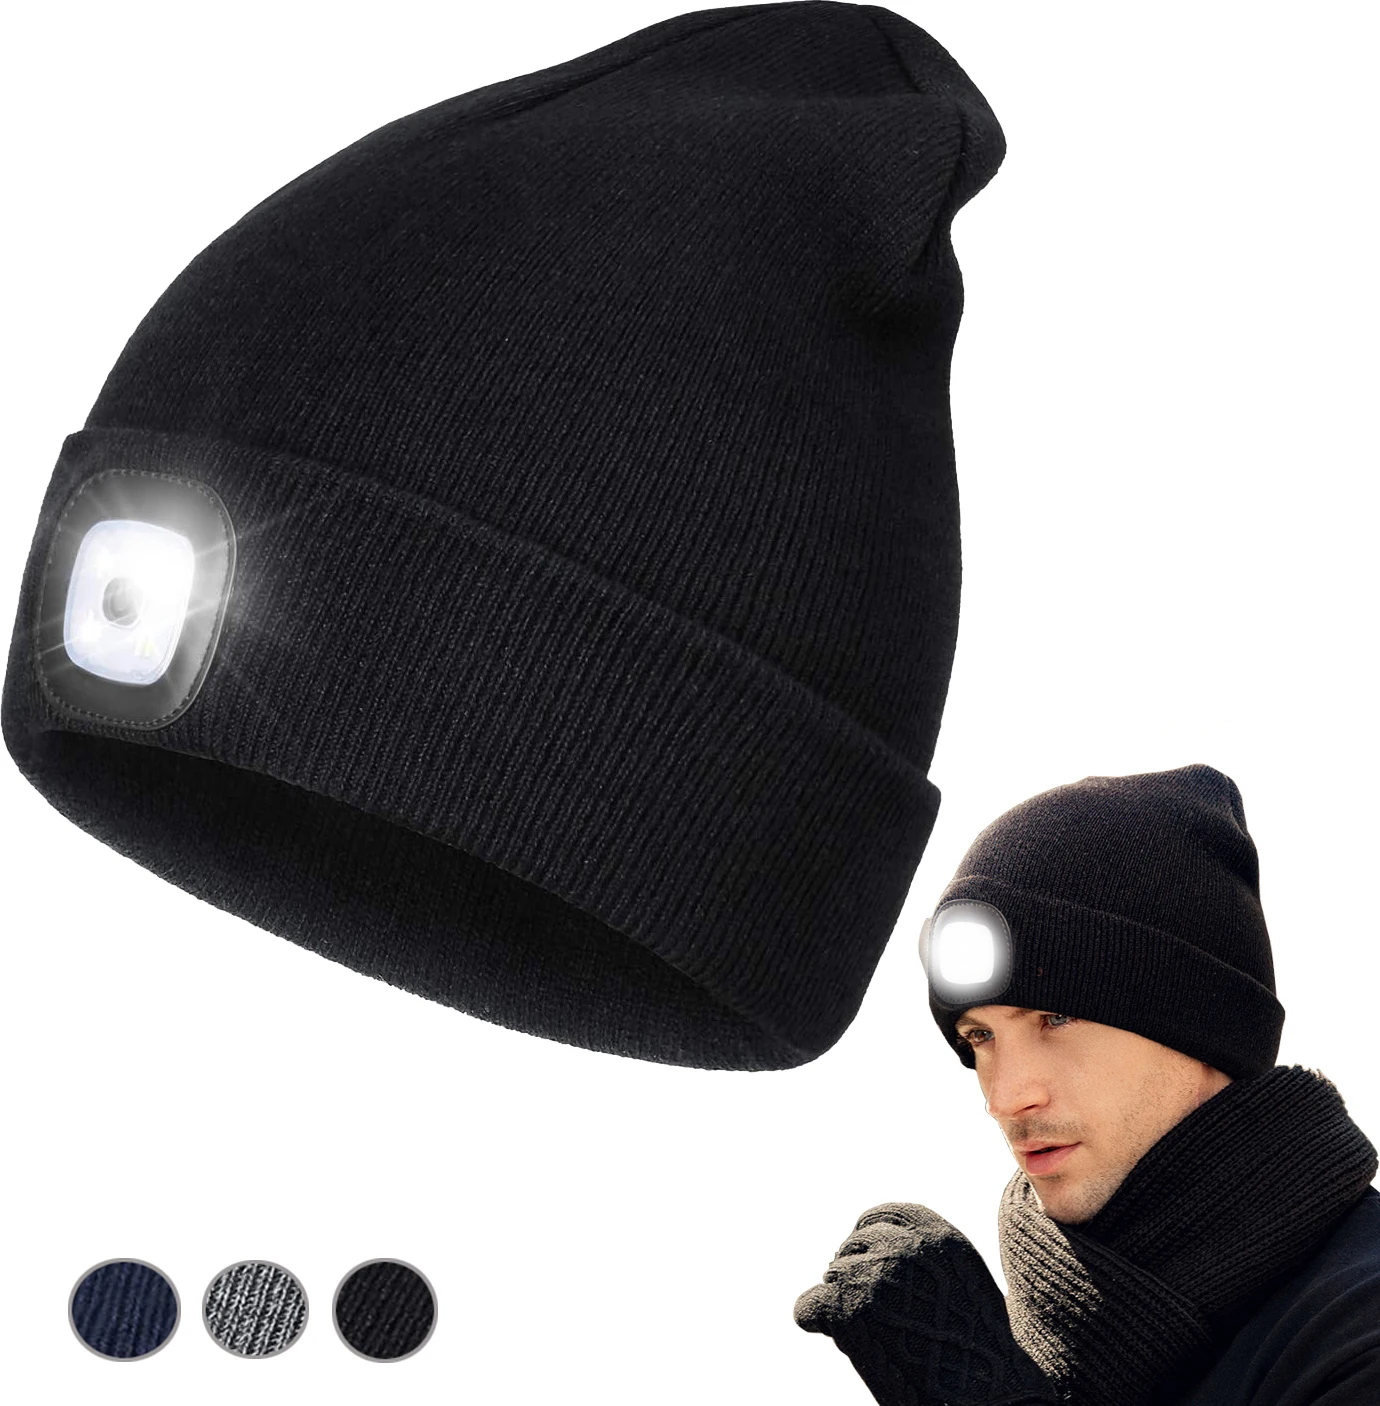 LED Beanie Hat with Light Unisex USB Rechargeable Lamp Hats Hands Free Headlamp Cap Winter Knitted